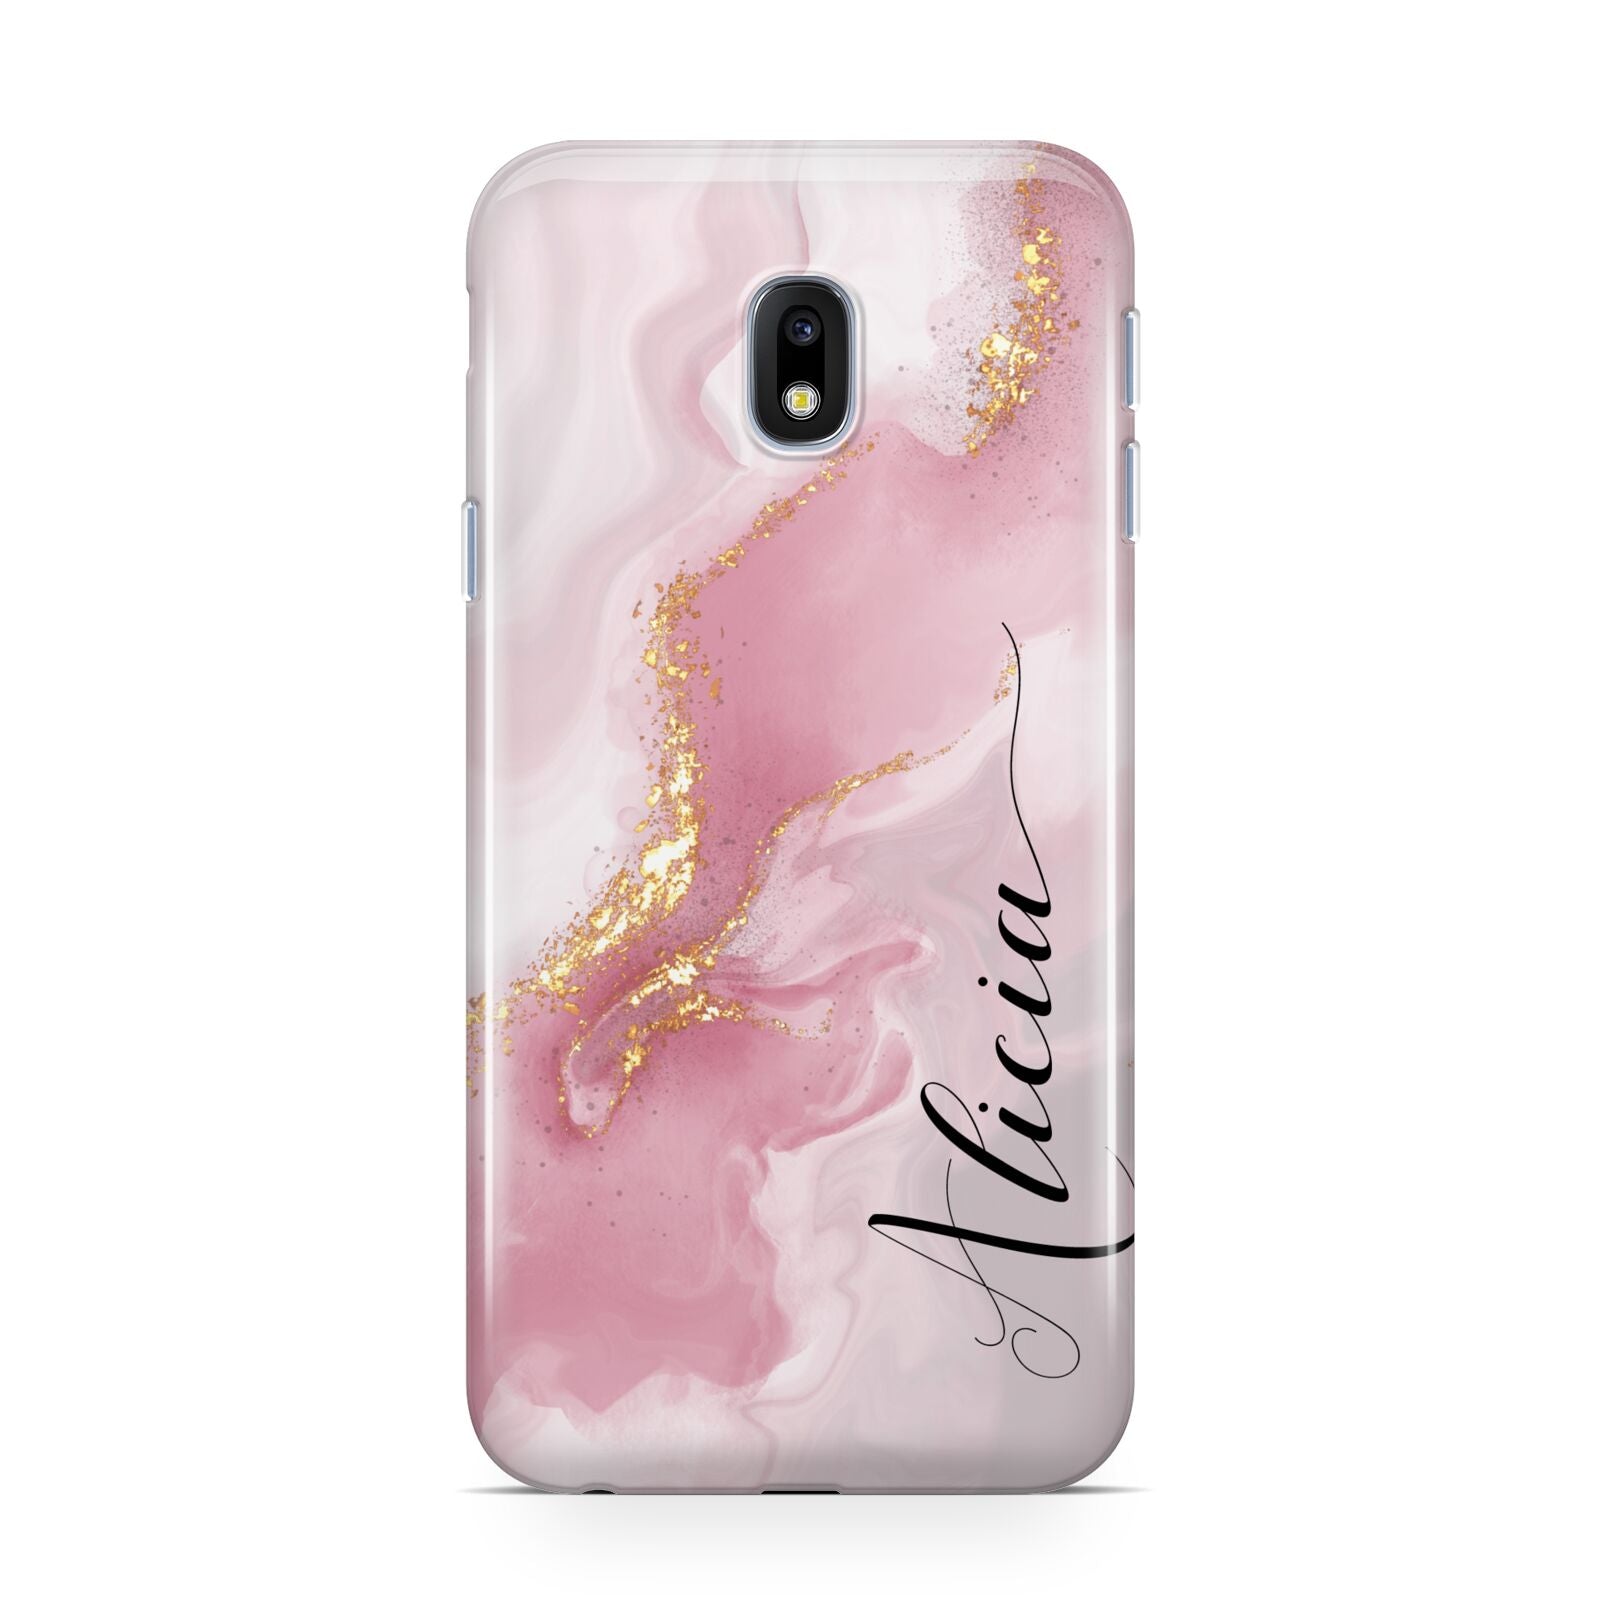 Personalised Pink Marble Samsung Galaxy J3 2017 Case